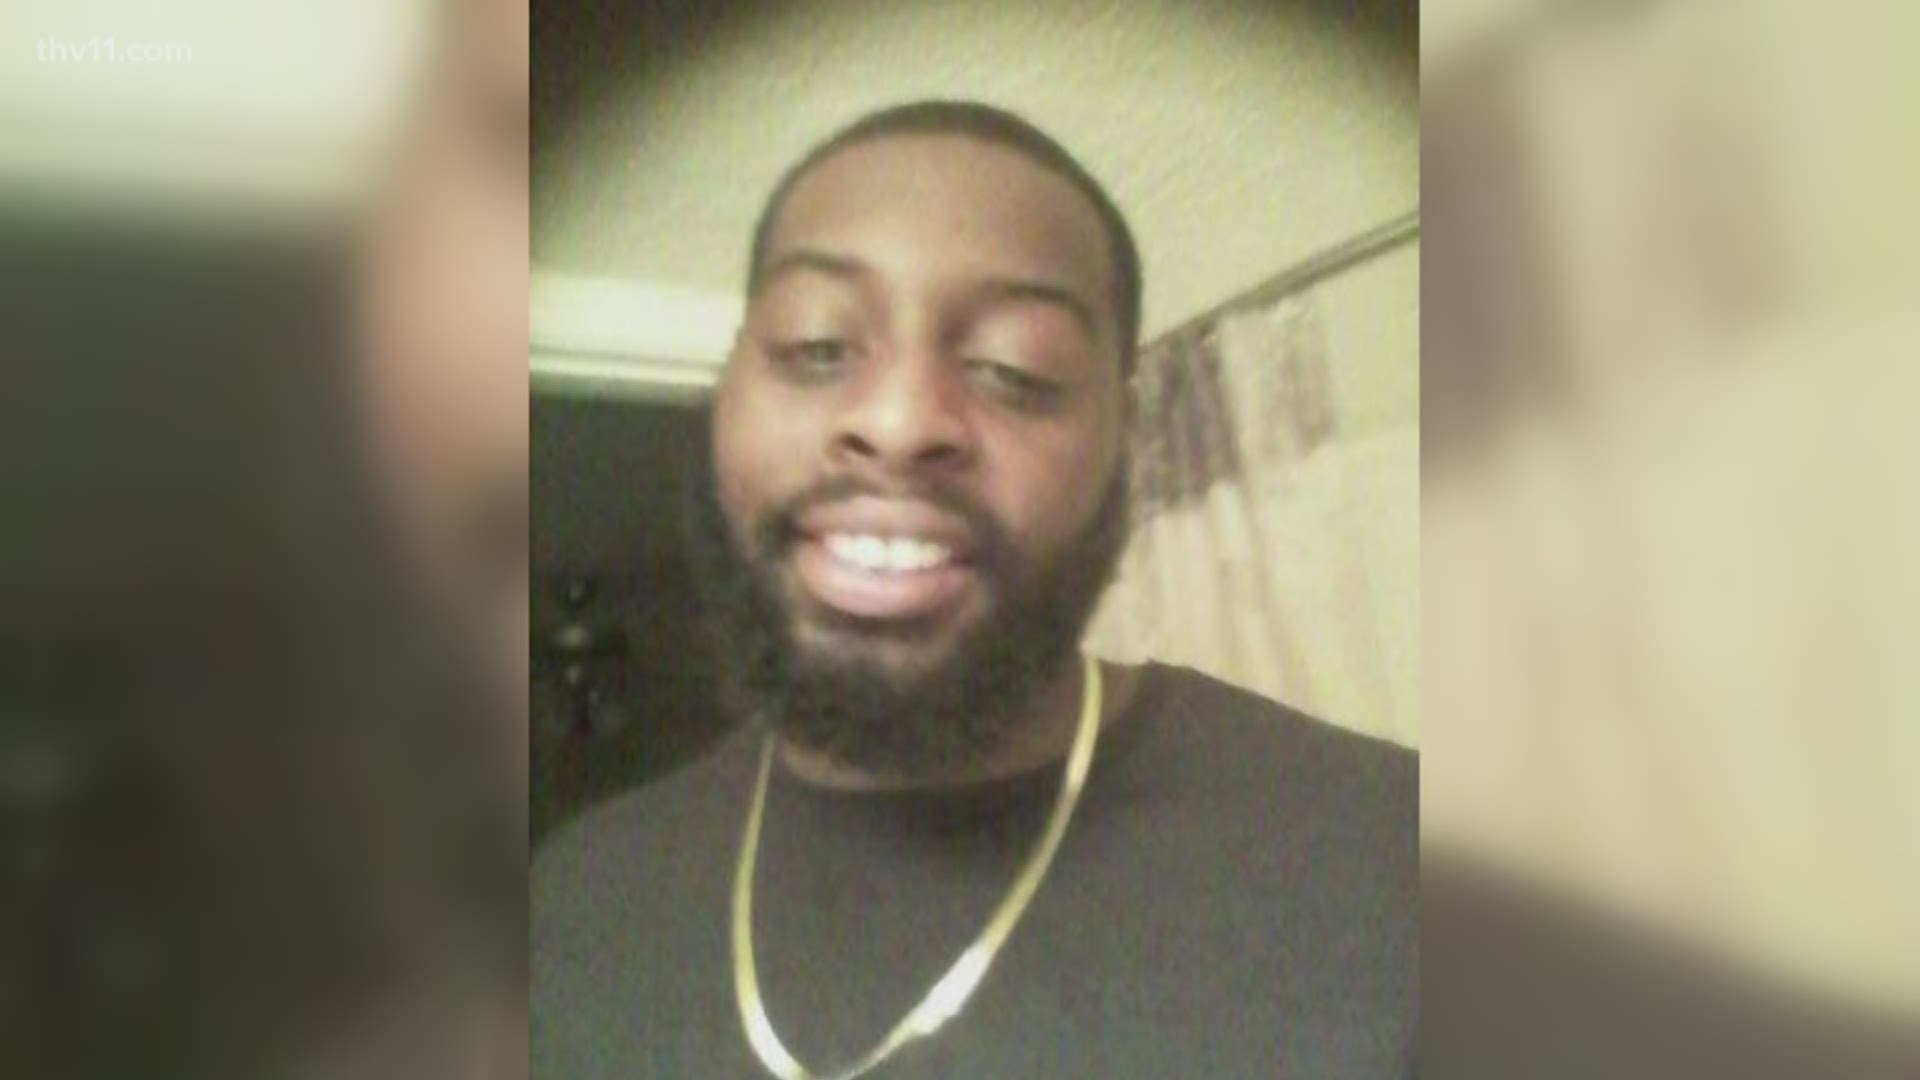 The family of Keundra Allen remembers his life and legacy after he was taken from them too soon. Allen was stabbed to death in Bentonville Thursday.